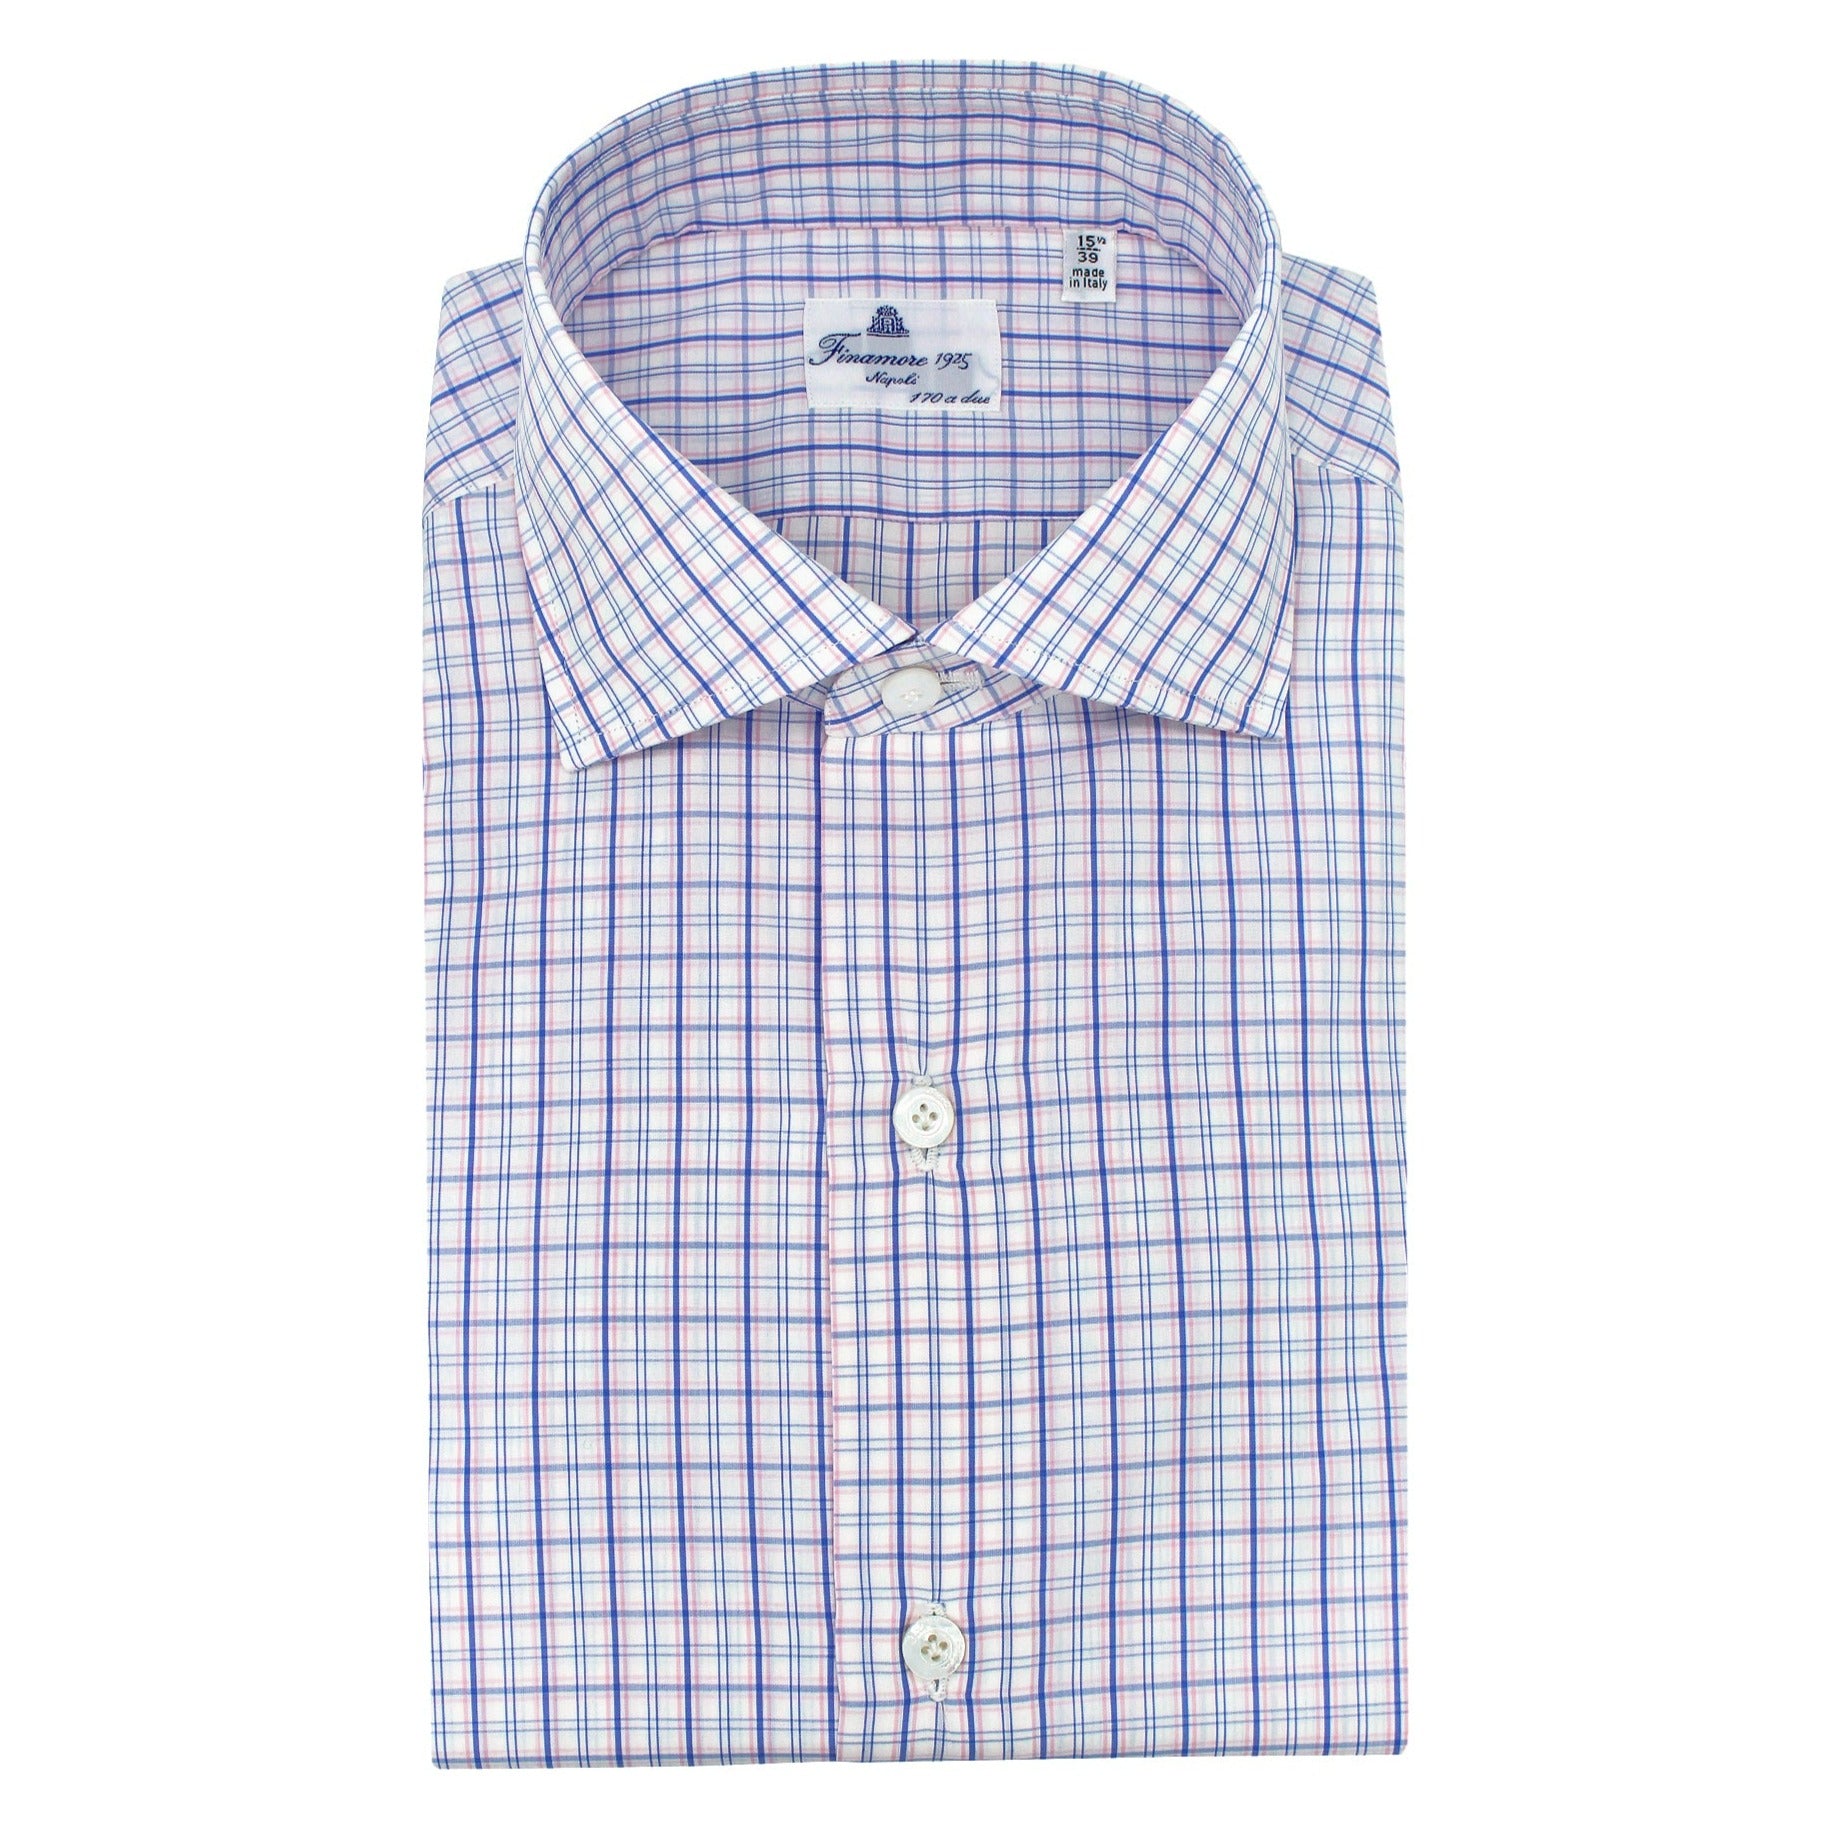 Shirt 170 two classic checkered pink and blue